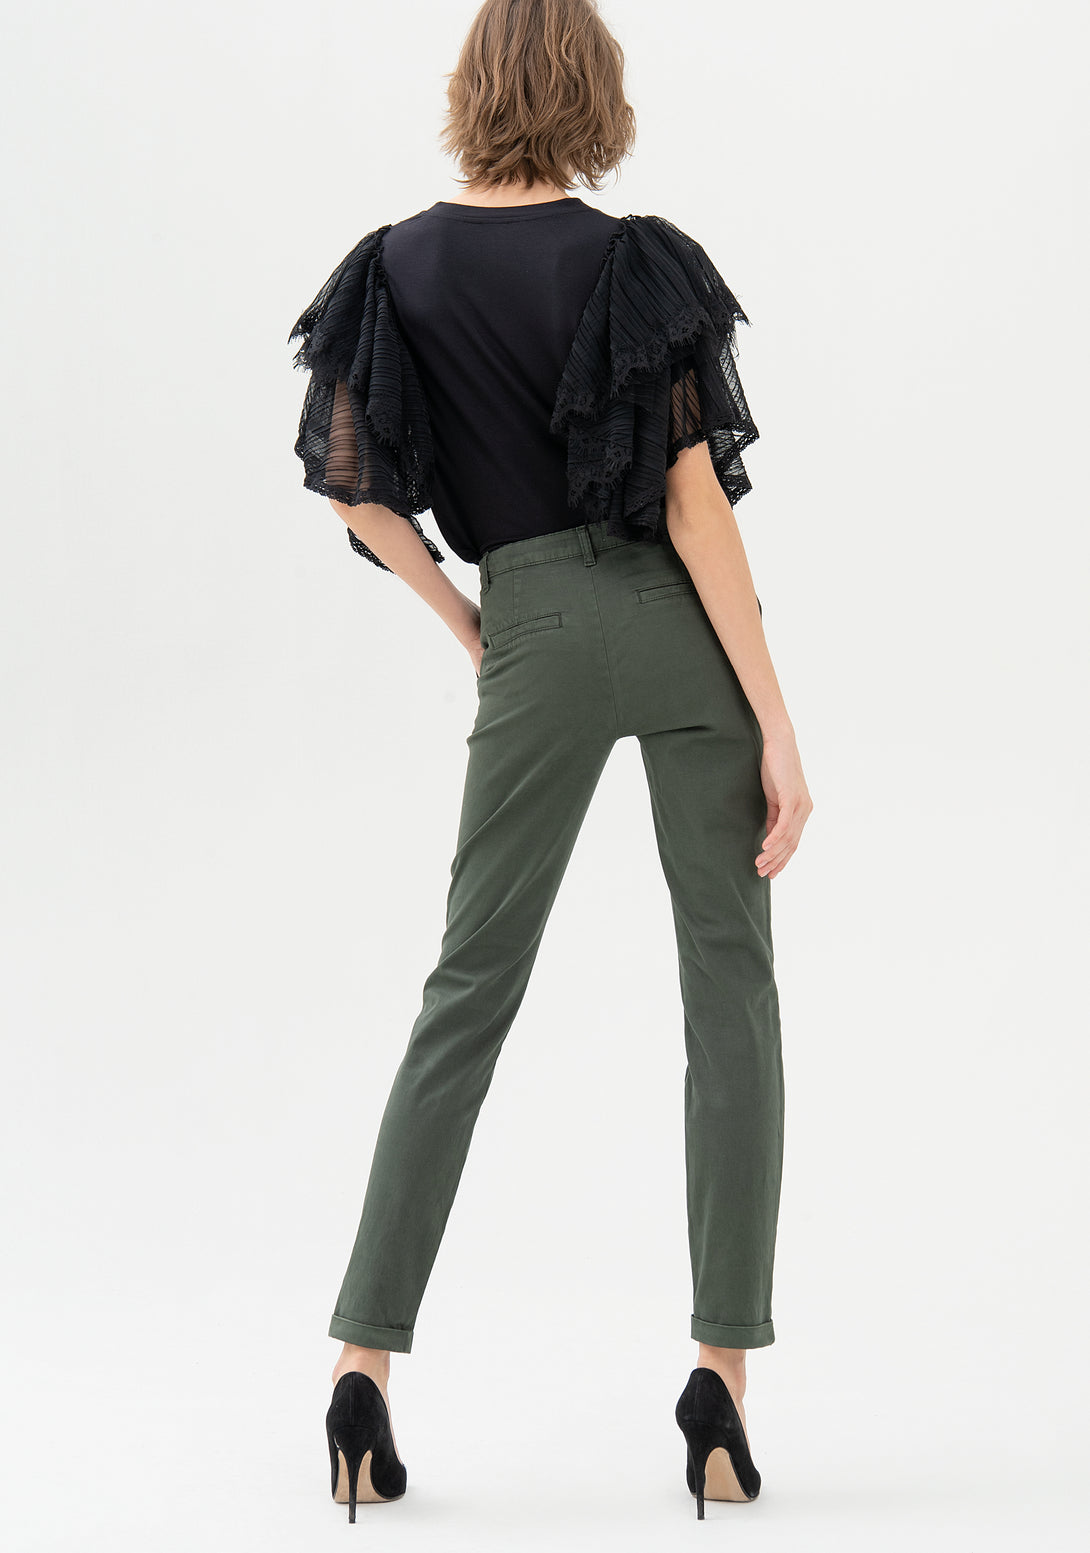 Straight leg pant made in cotton satin